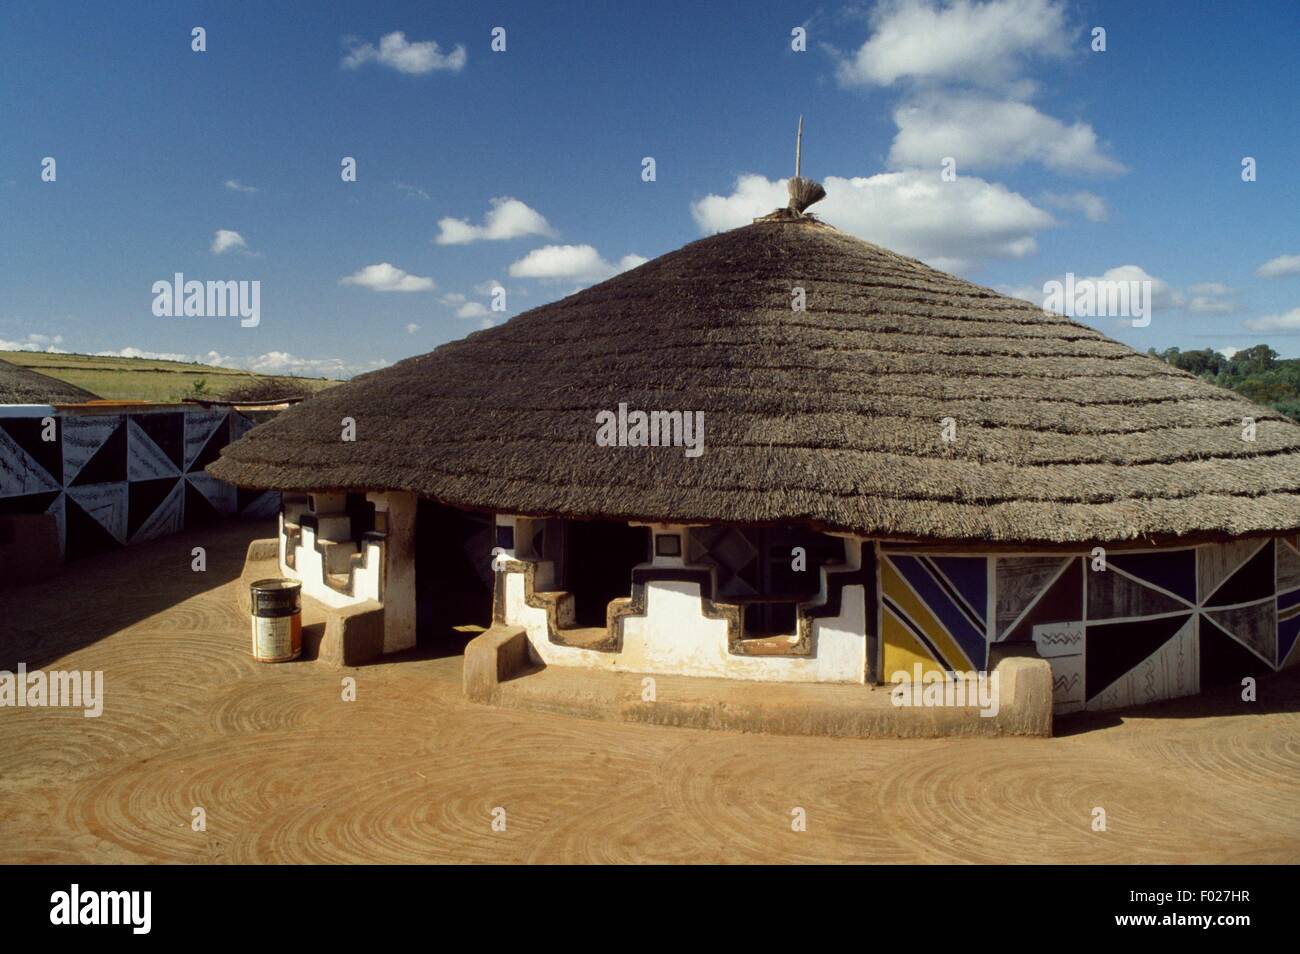 Hut in a Ndebele village, South Africa. Stock Photo